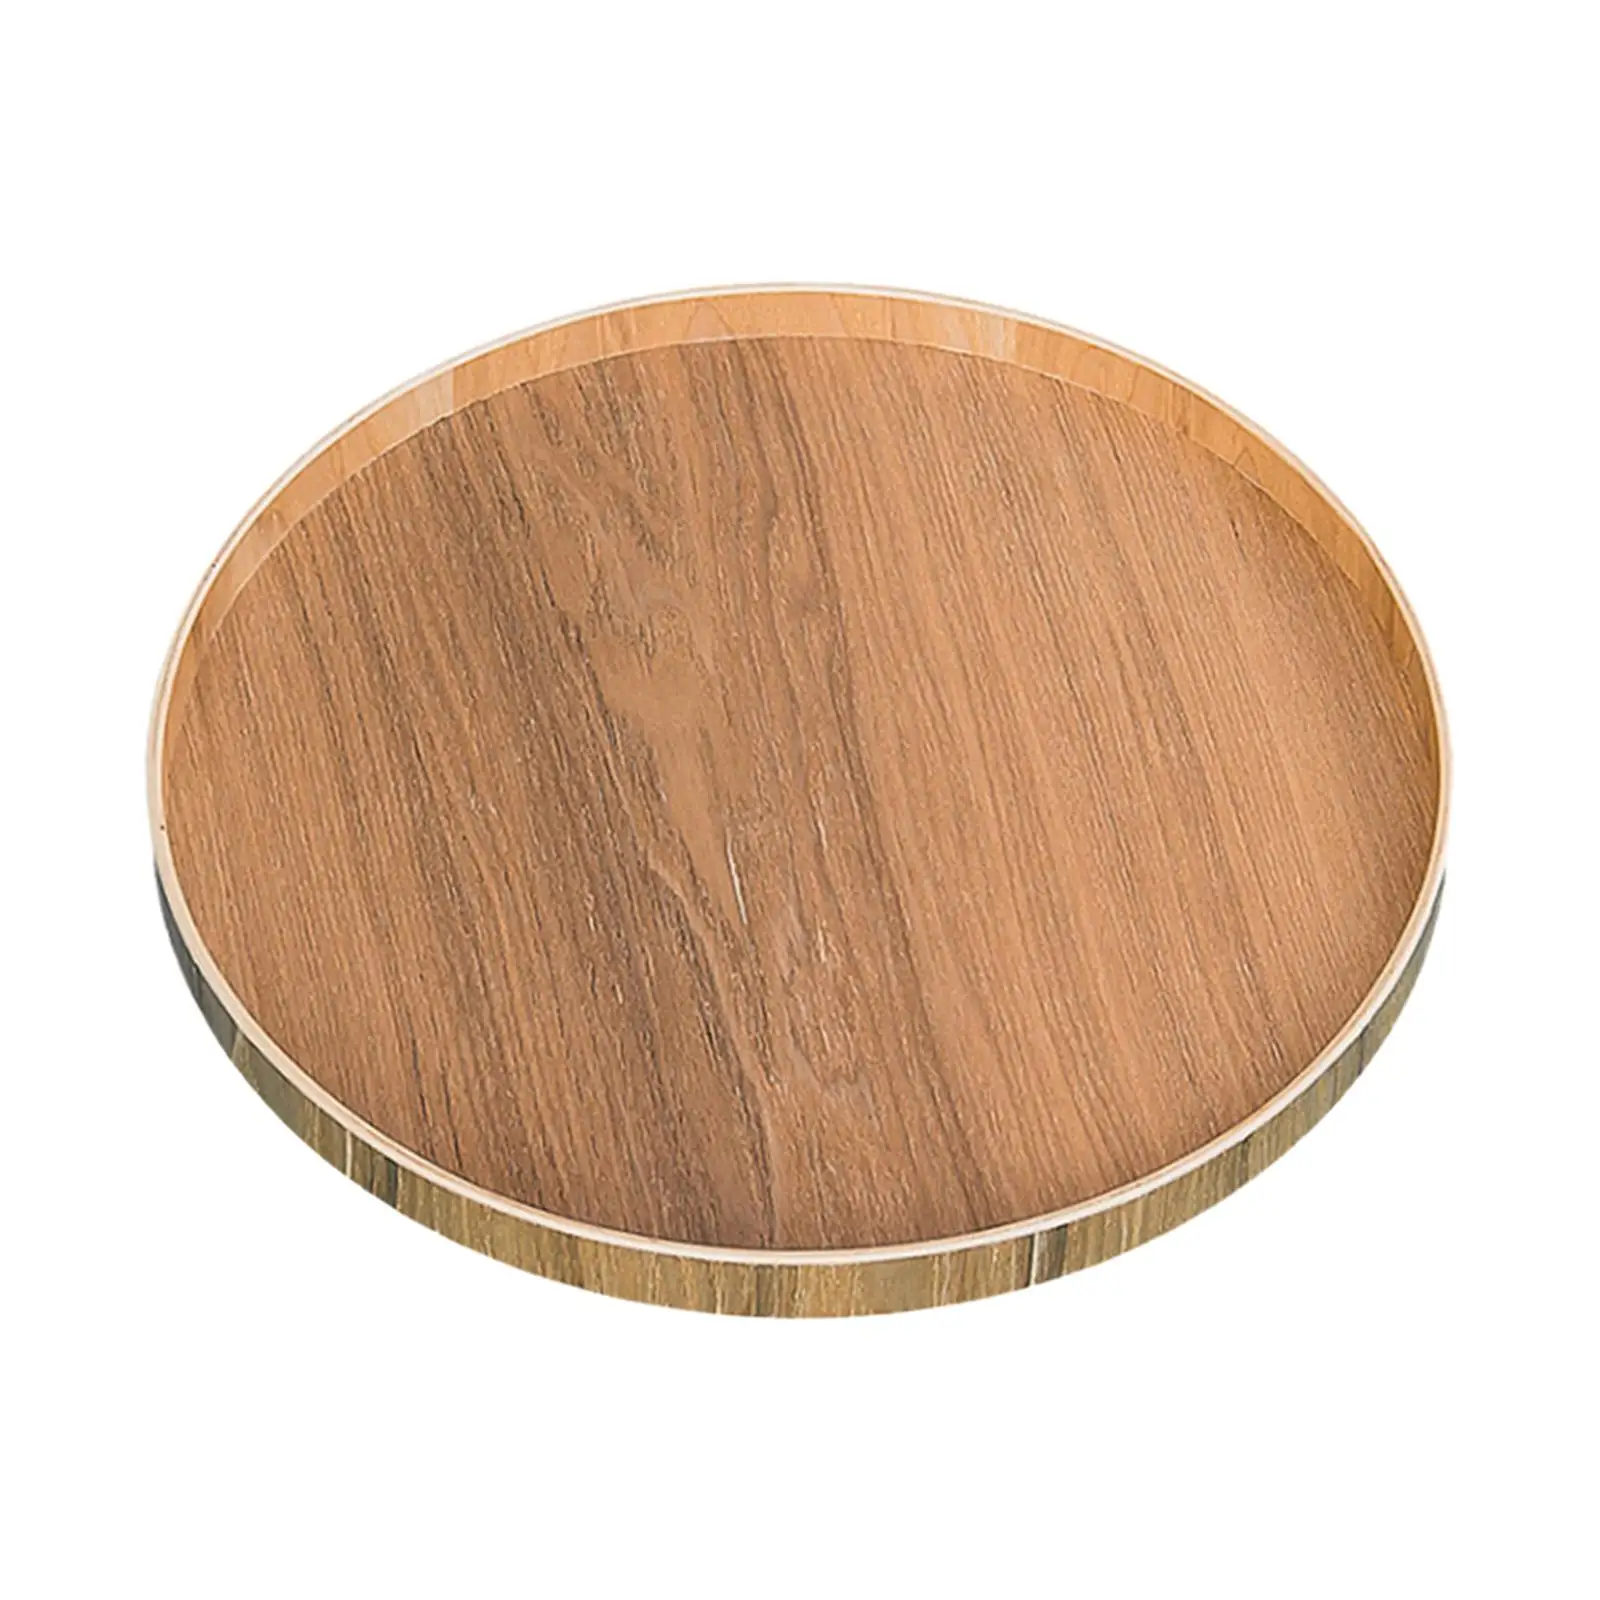 Wooden Serving Plate Snack Candies Plate Dessert Tray Party Serving Platter for Table Centerpiece Kitchen Bathroom Cabinet Home